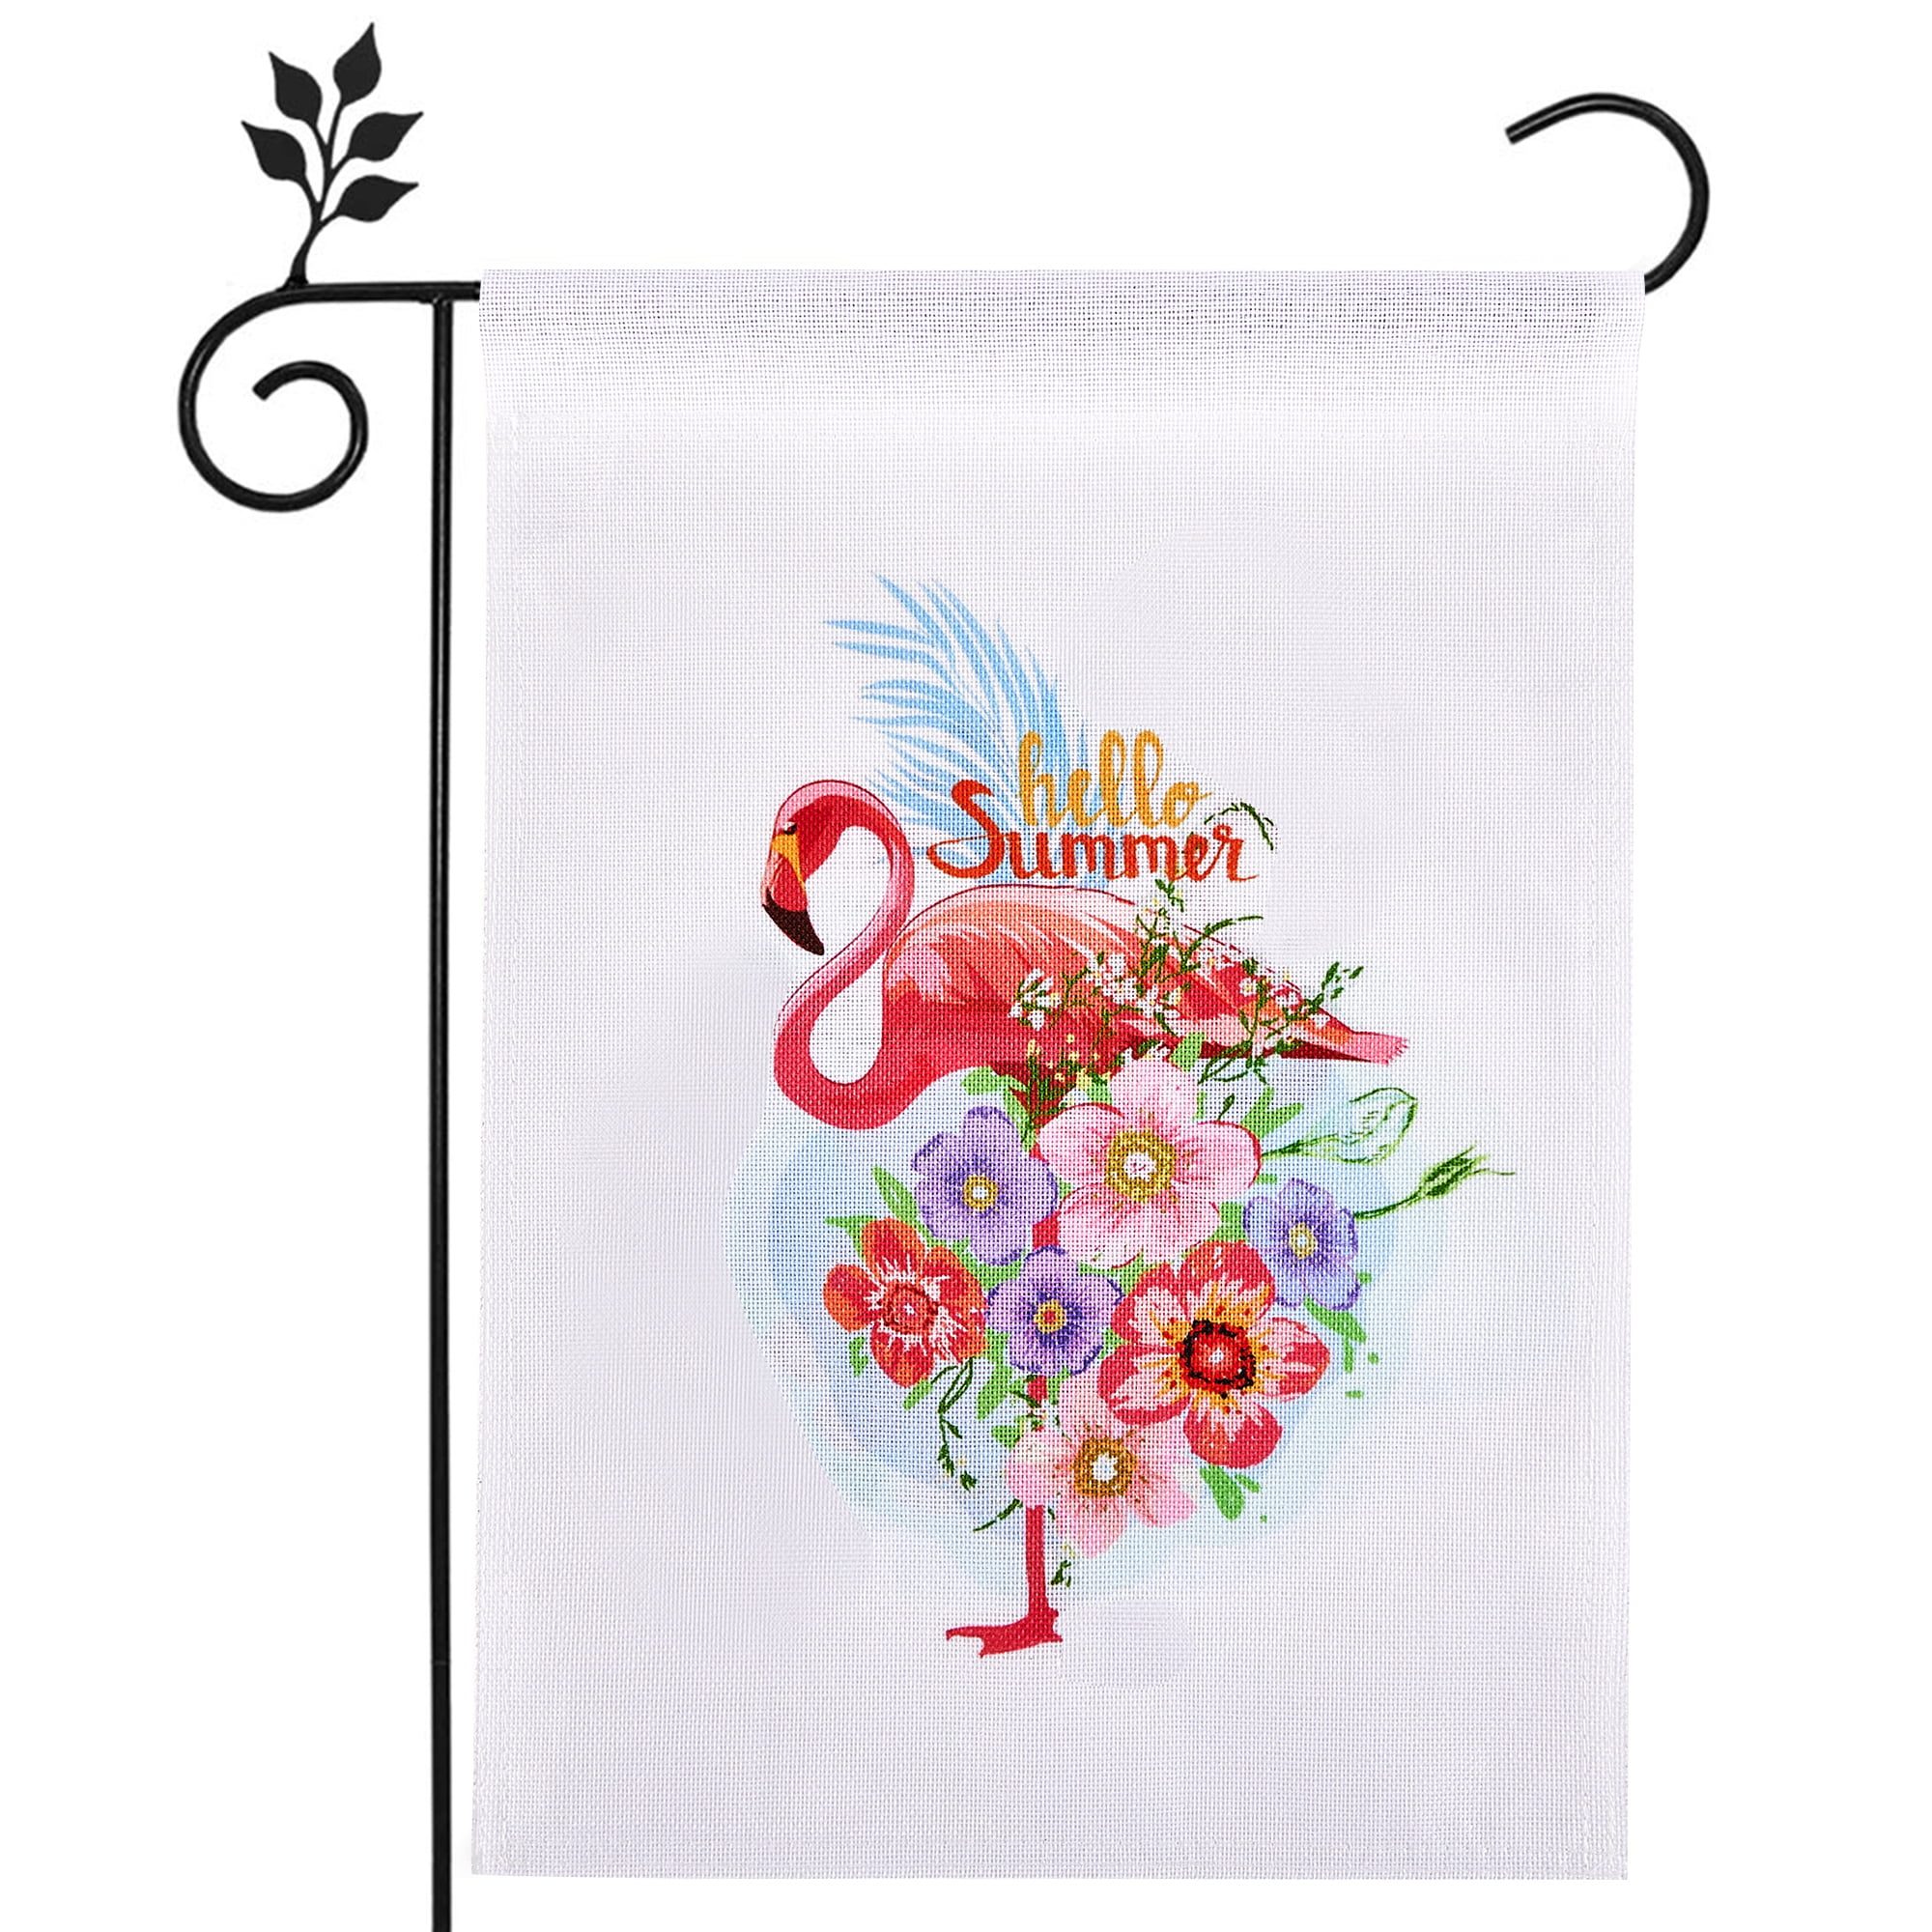 Shipping Summer Sun and Fun Garden Flag 18 by 12 Inches Free U.S 